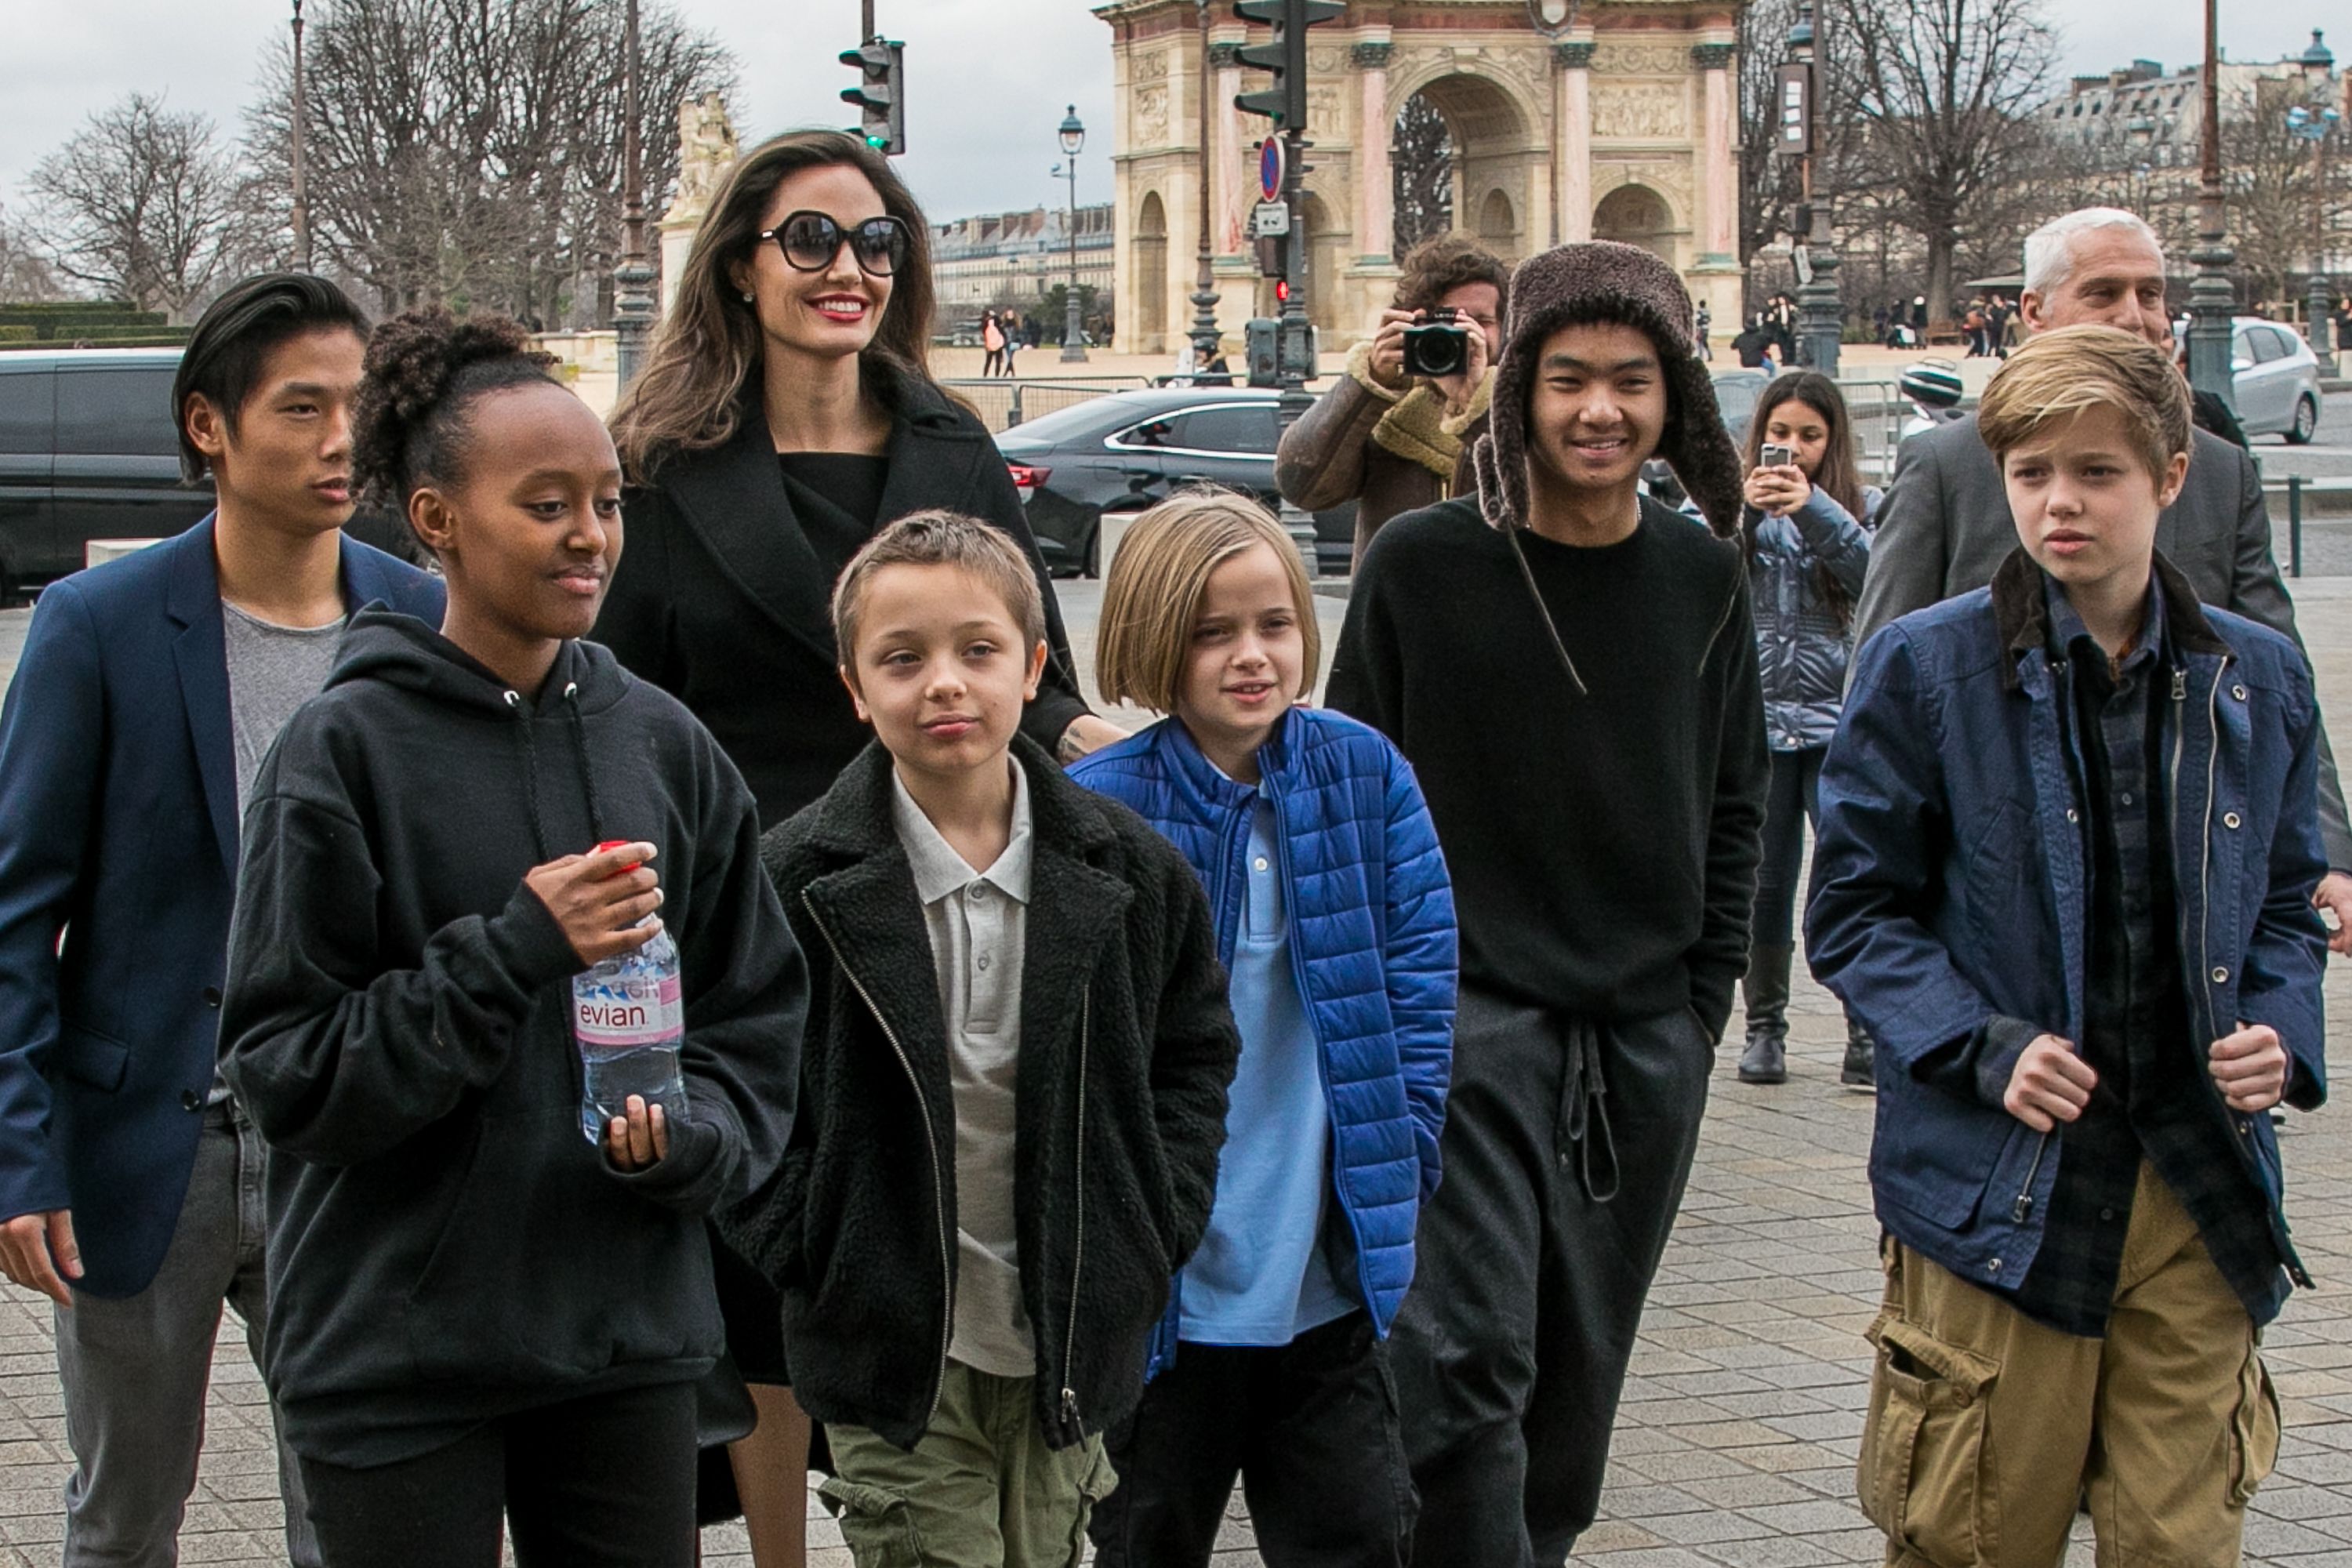 Angelina Jolie and her children Maddox, Shiloh, Vivienne, Knox, Zahara, and Pax Jolie-Pitt arriving at the Louvre museum on January 30, 2018, in Paris, France | Photo: Getty Images